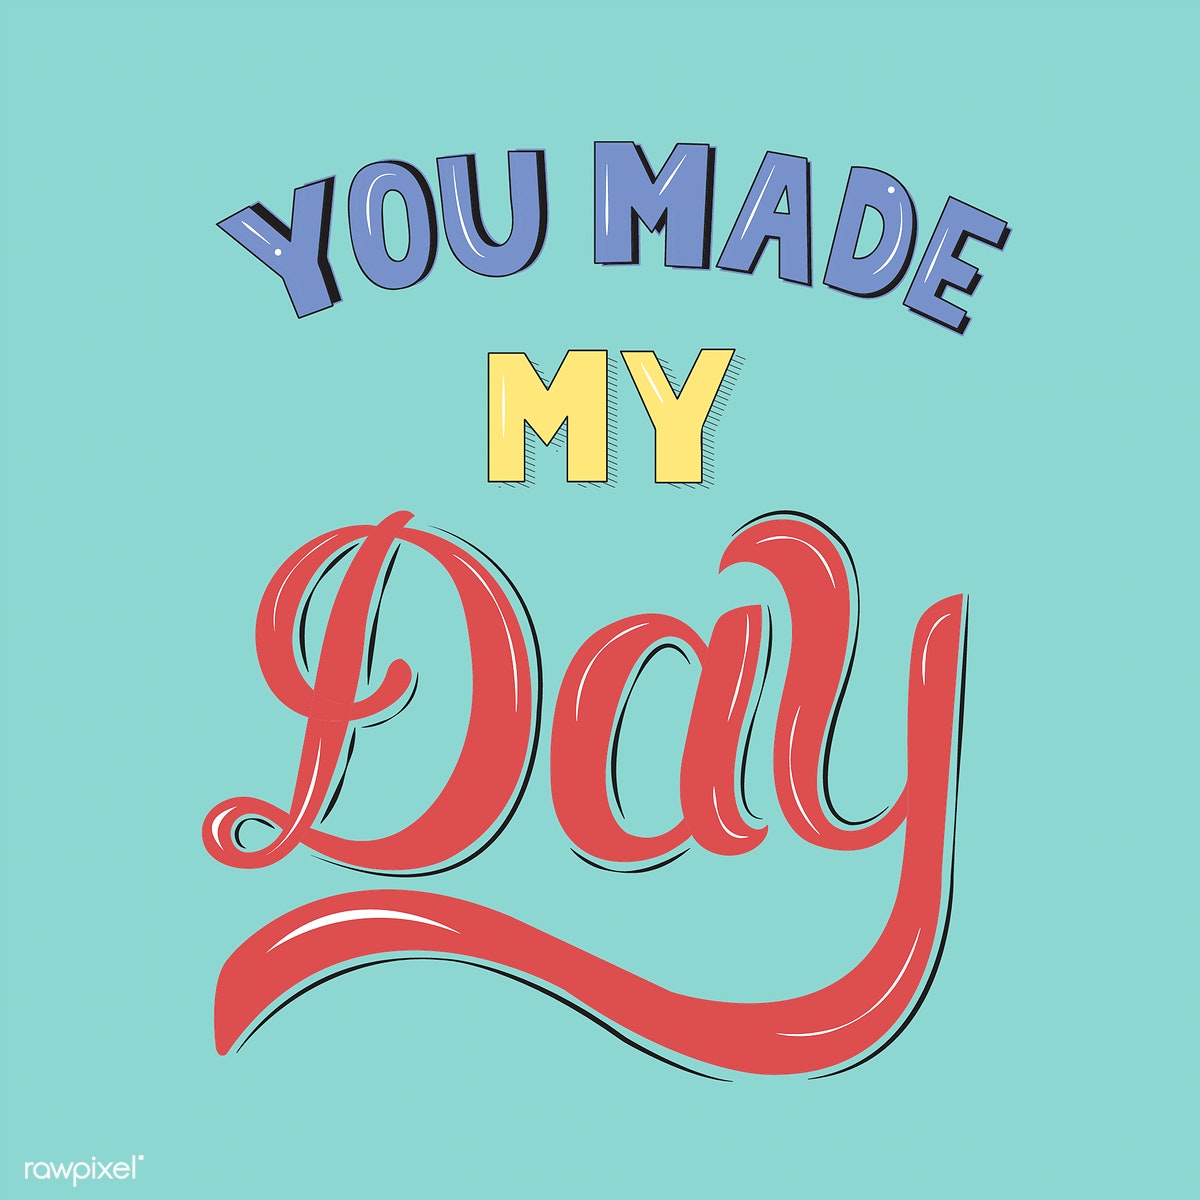 A you made my day quote image